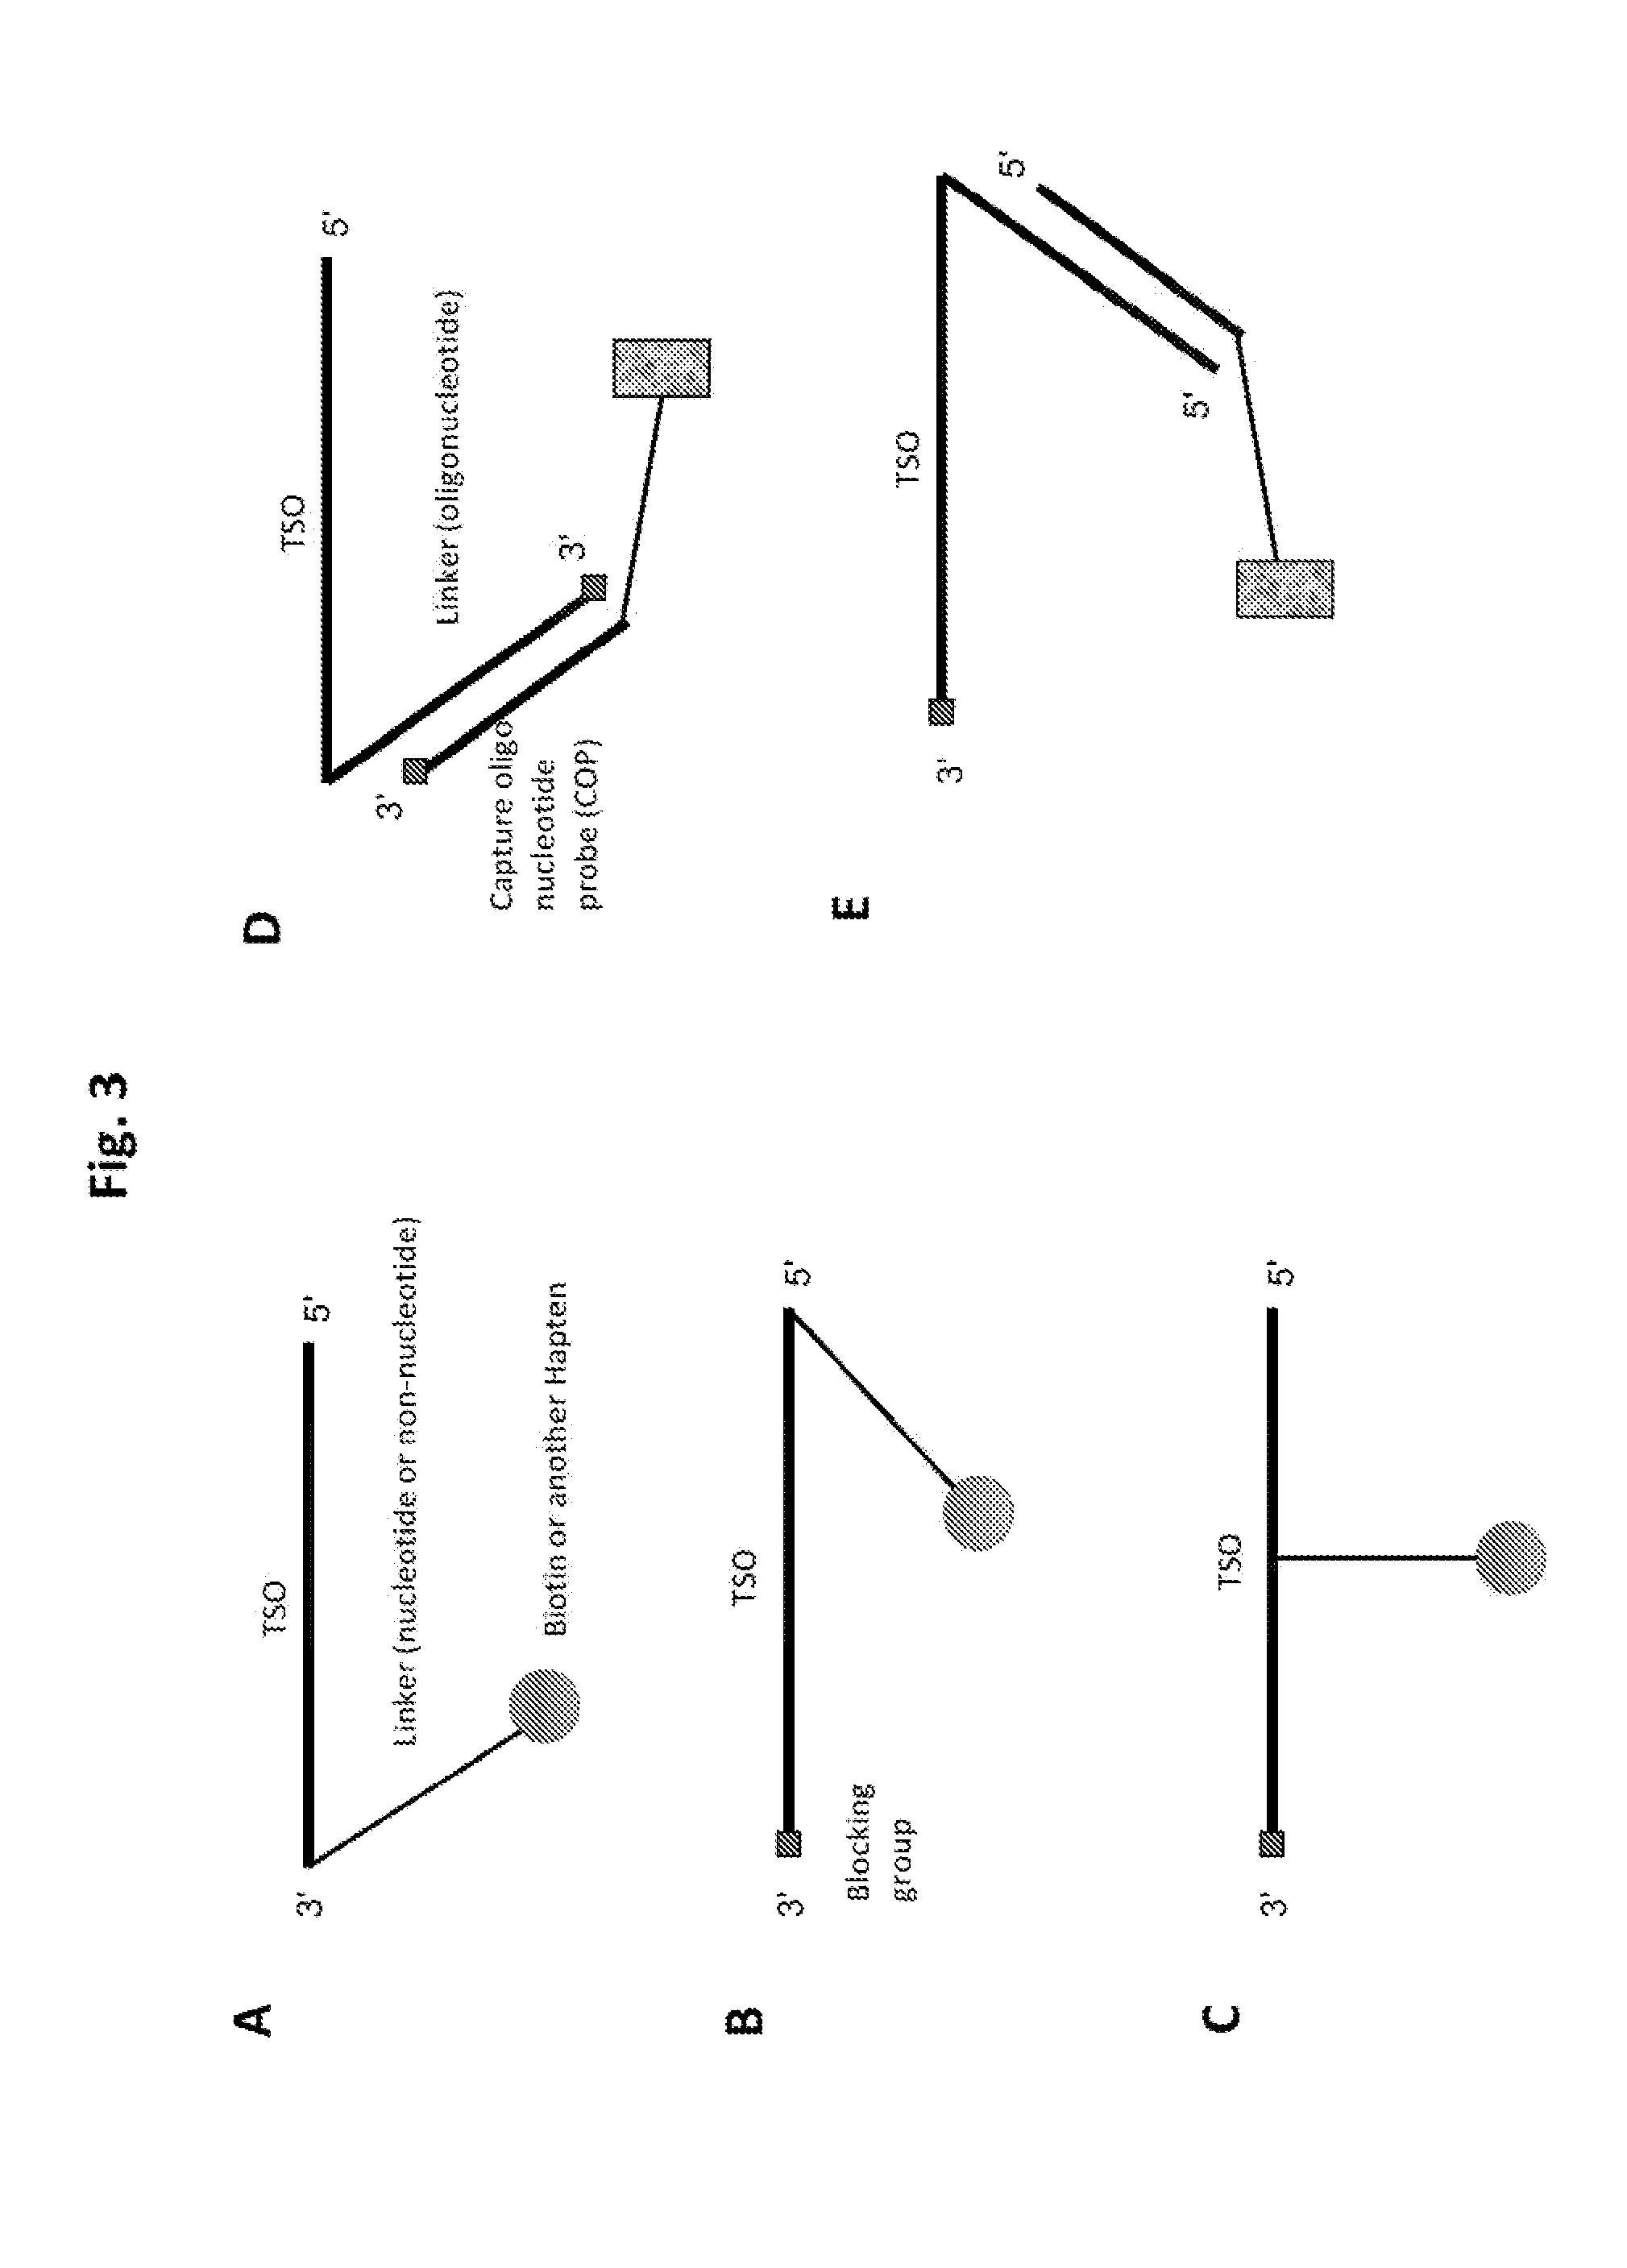 Methods of constructing small RNA libraries and their use for expression profiling of target rnas